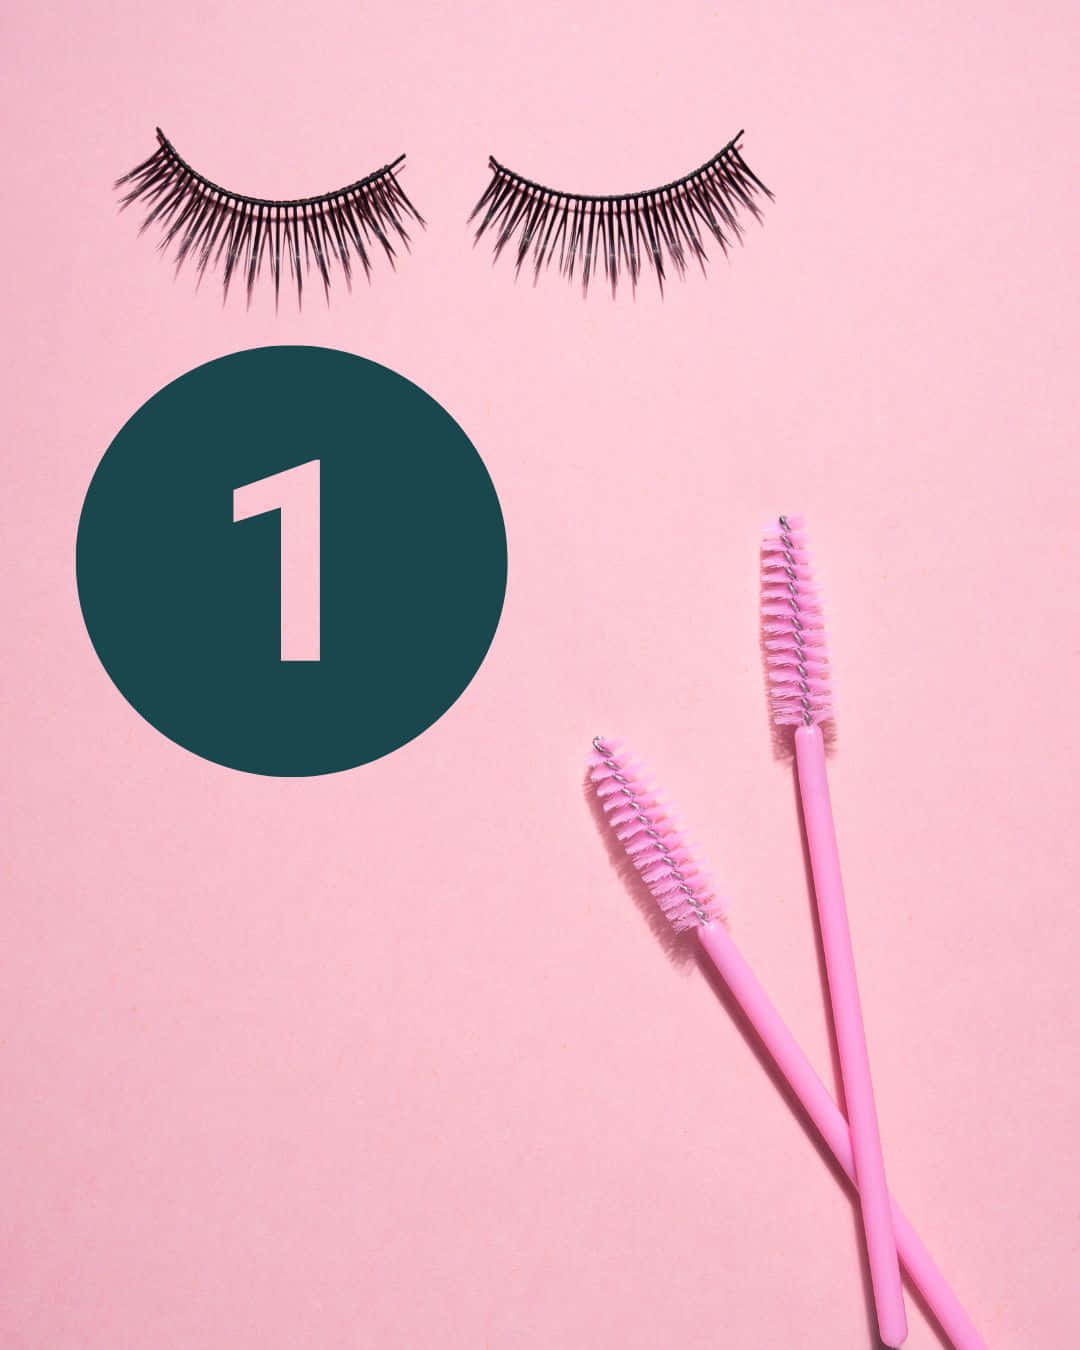 Get the perfect eyelashes to make your eyes shine